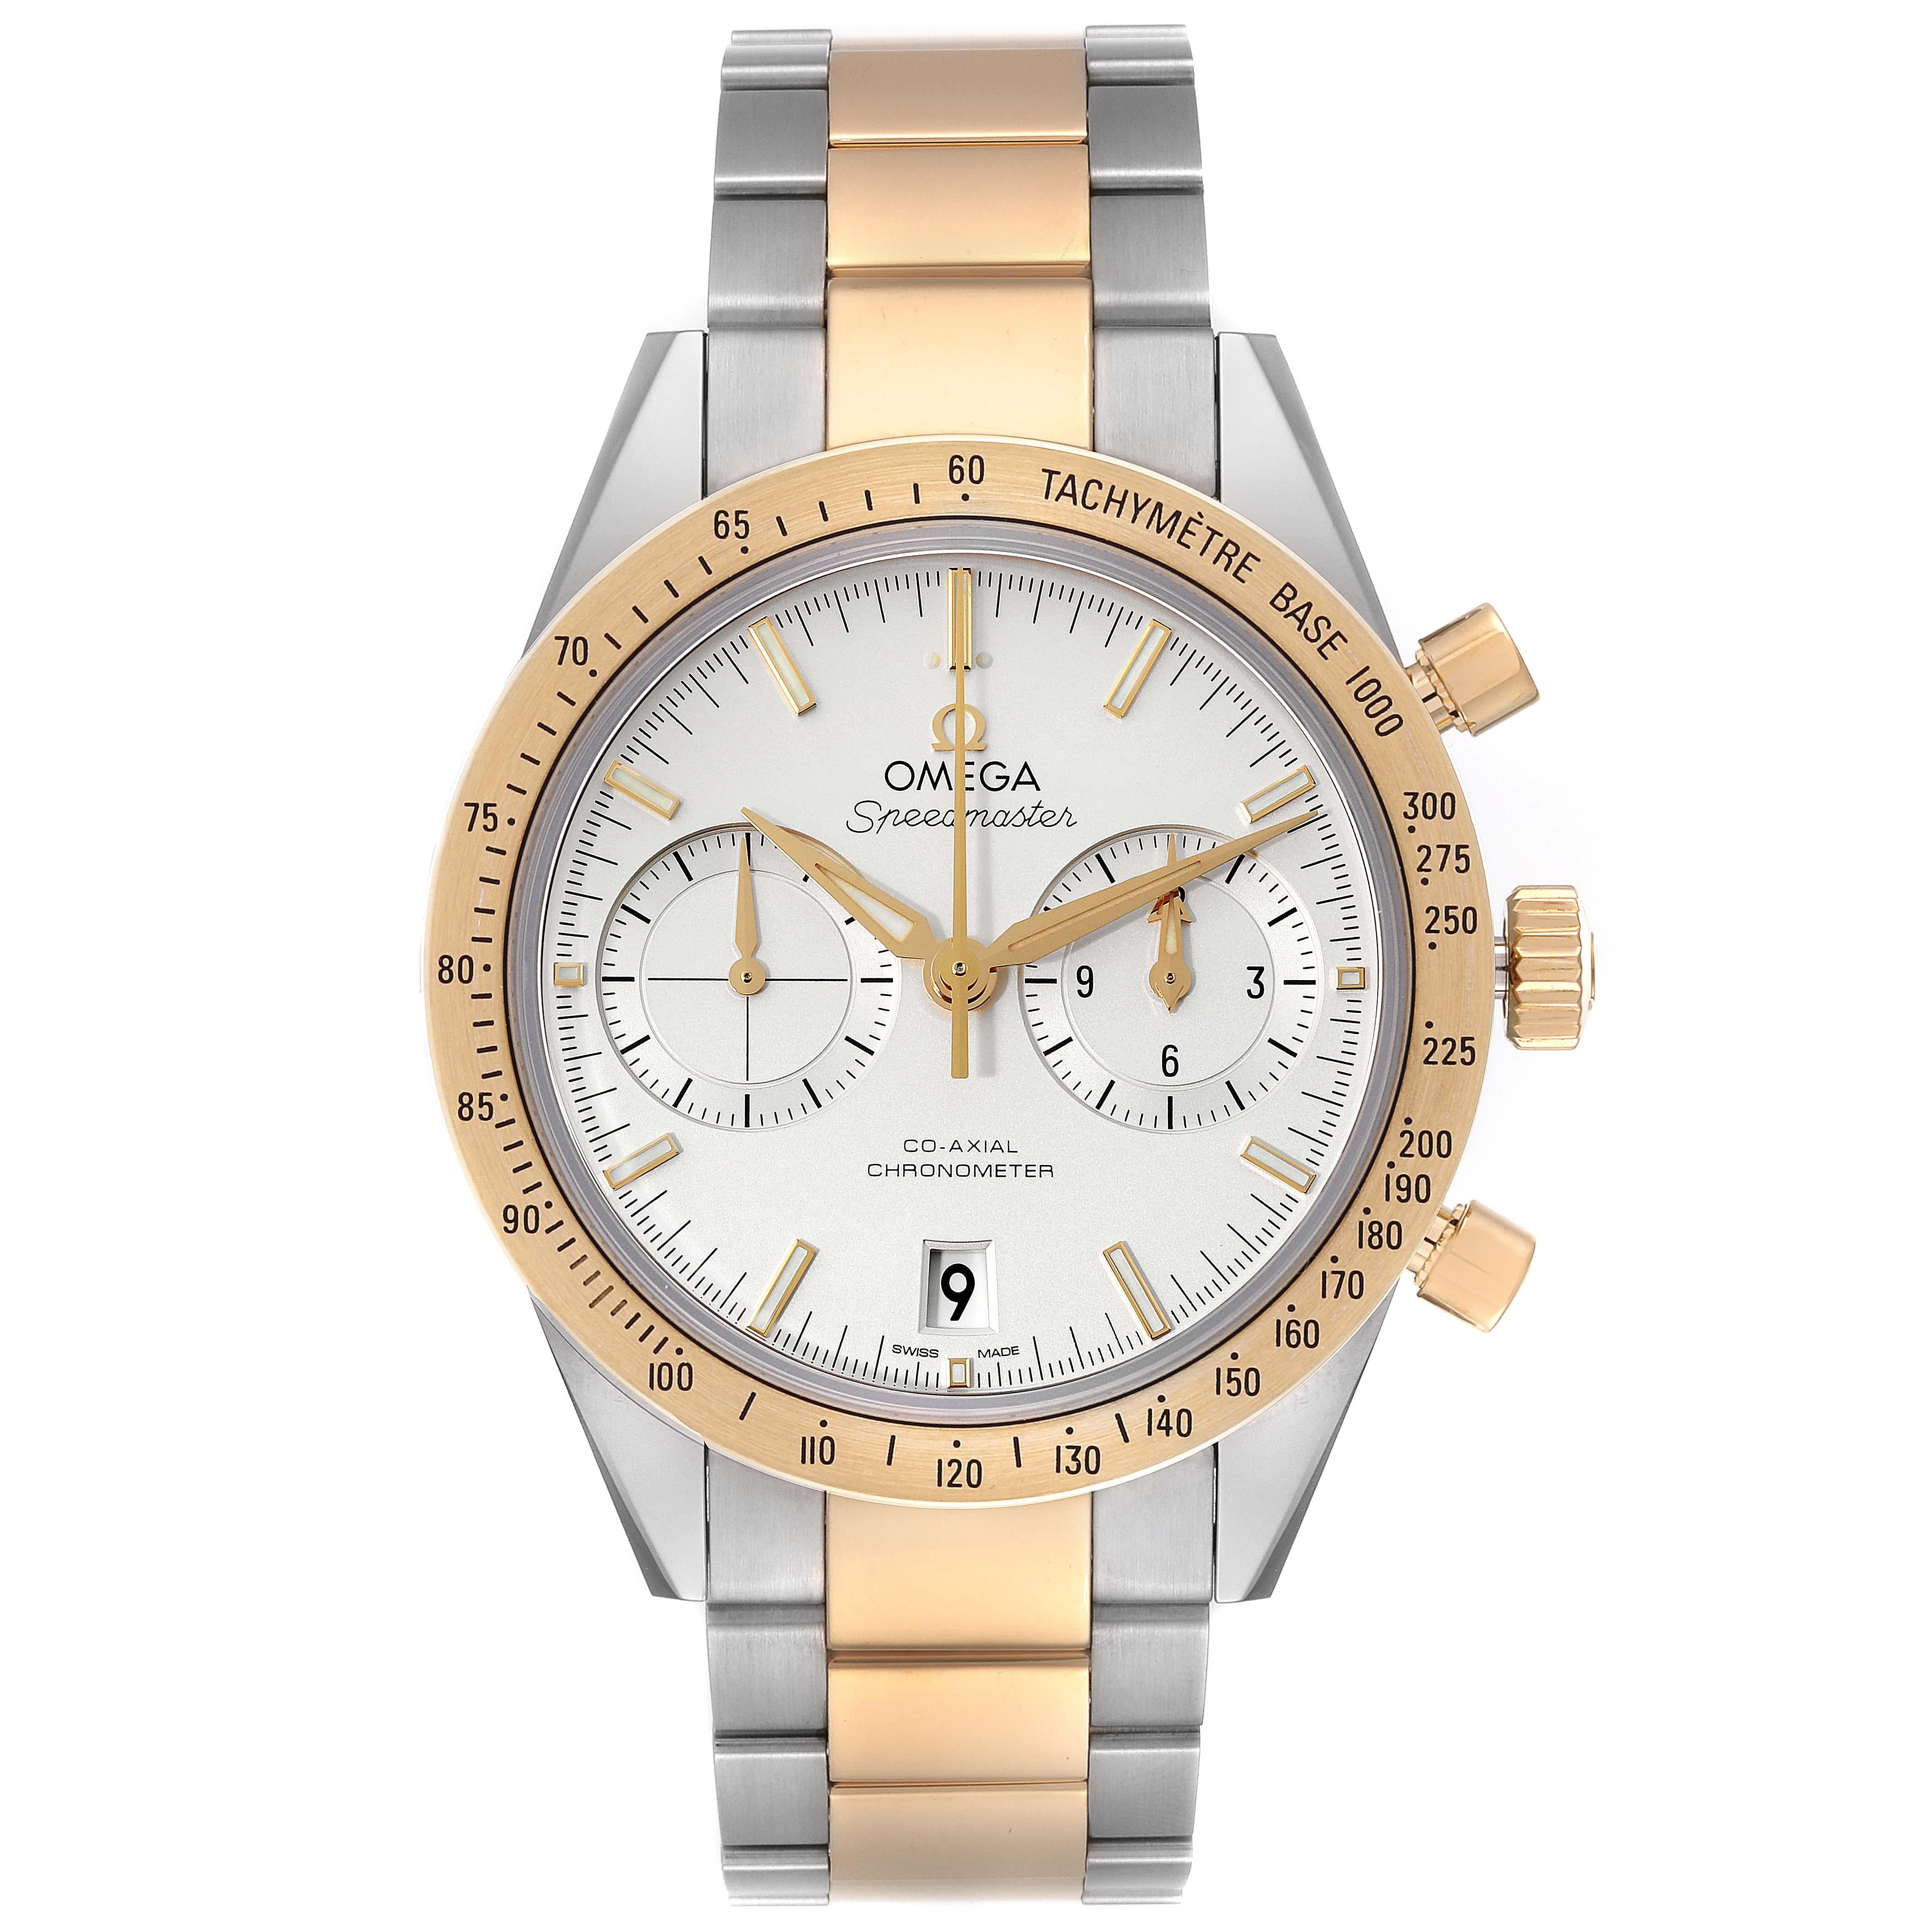 Omega Speedmaster 57 Steel Yellow Gold Watch 331.20.42.51.02.001 Card. Automatic self-winding chronograph movement with column wheel mechanism and Co-Axial escapement. Silicon balance-spring on free sprung-balance, 2 barrels mounted in series,